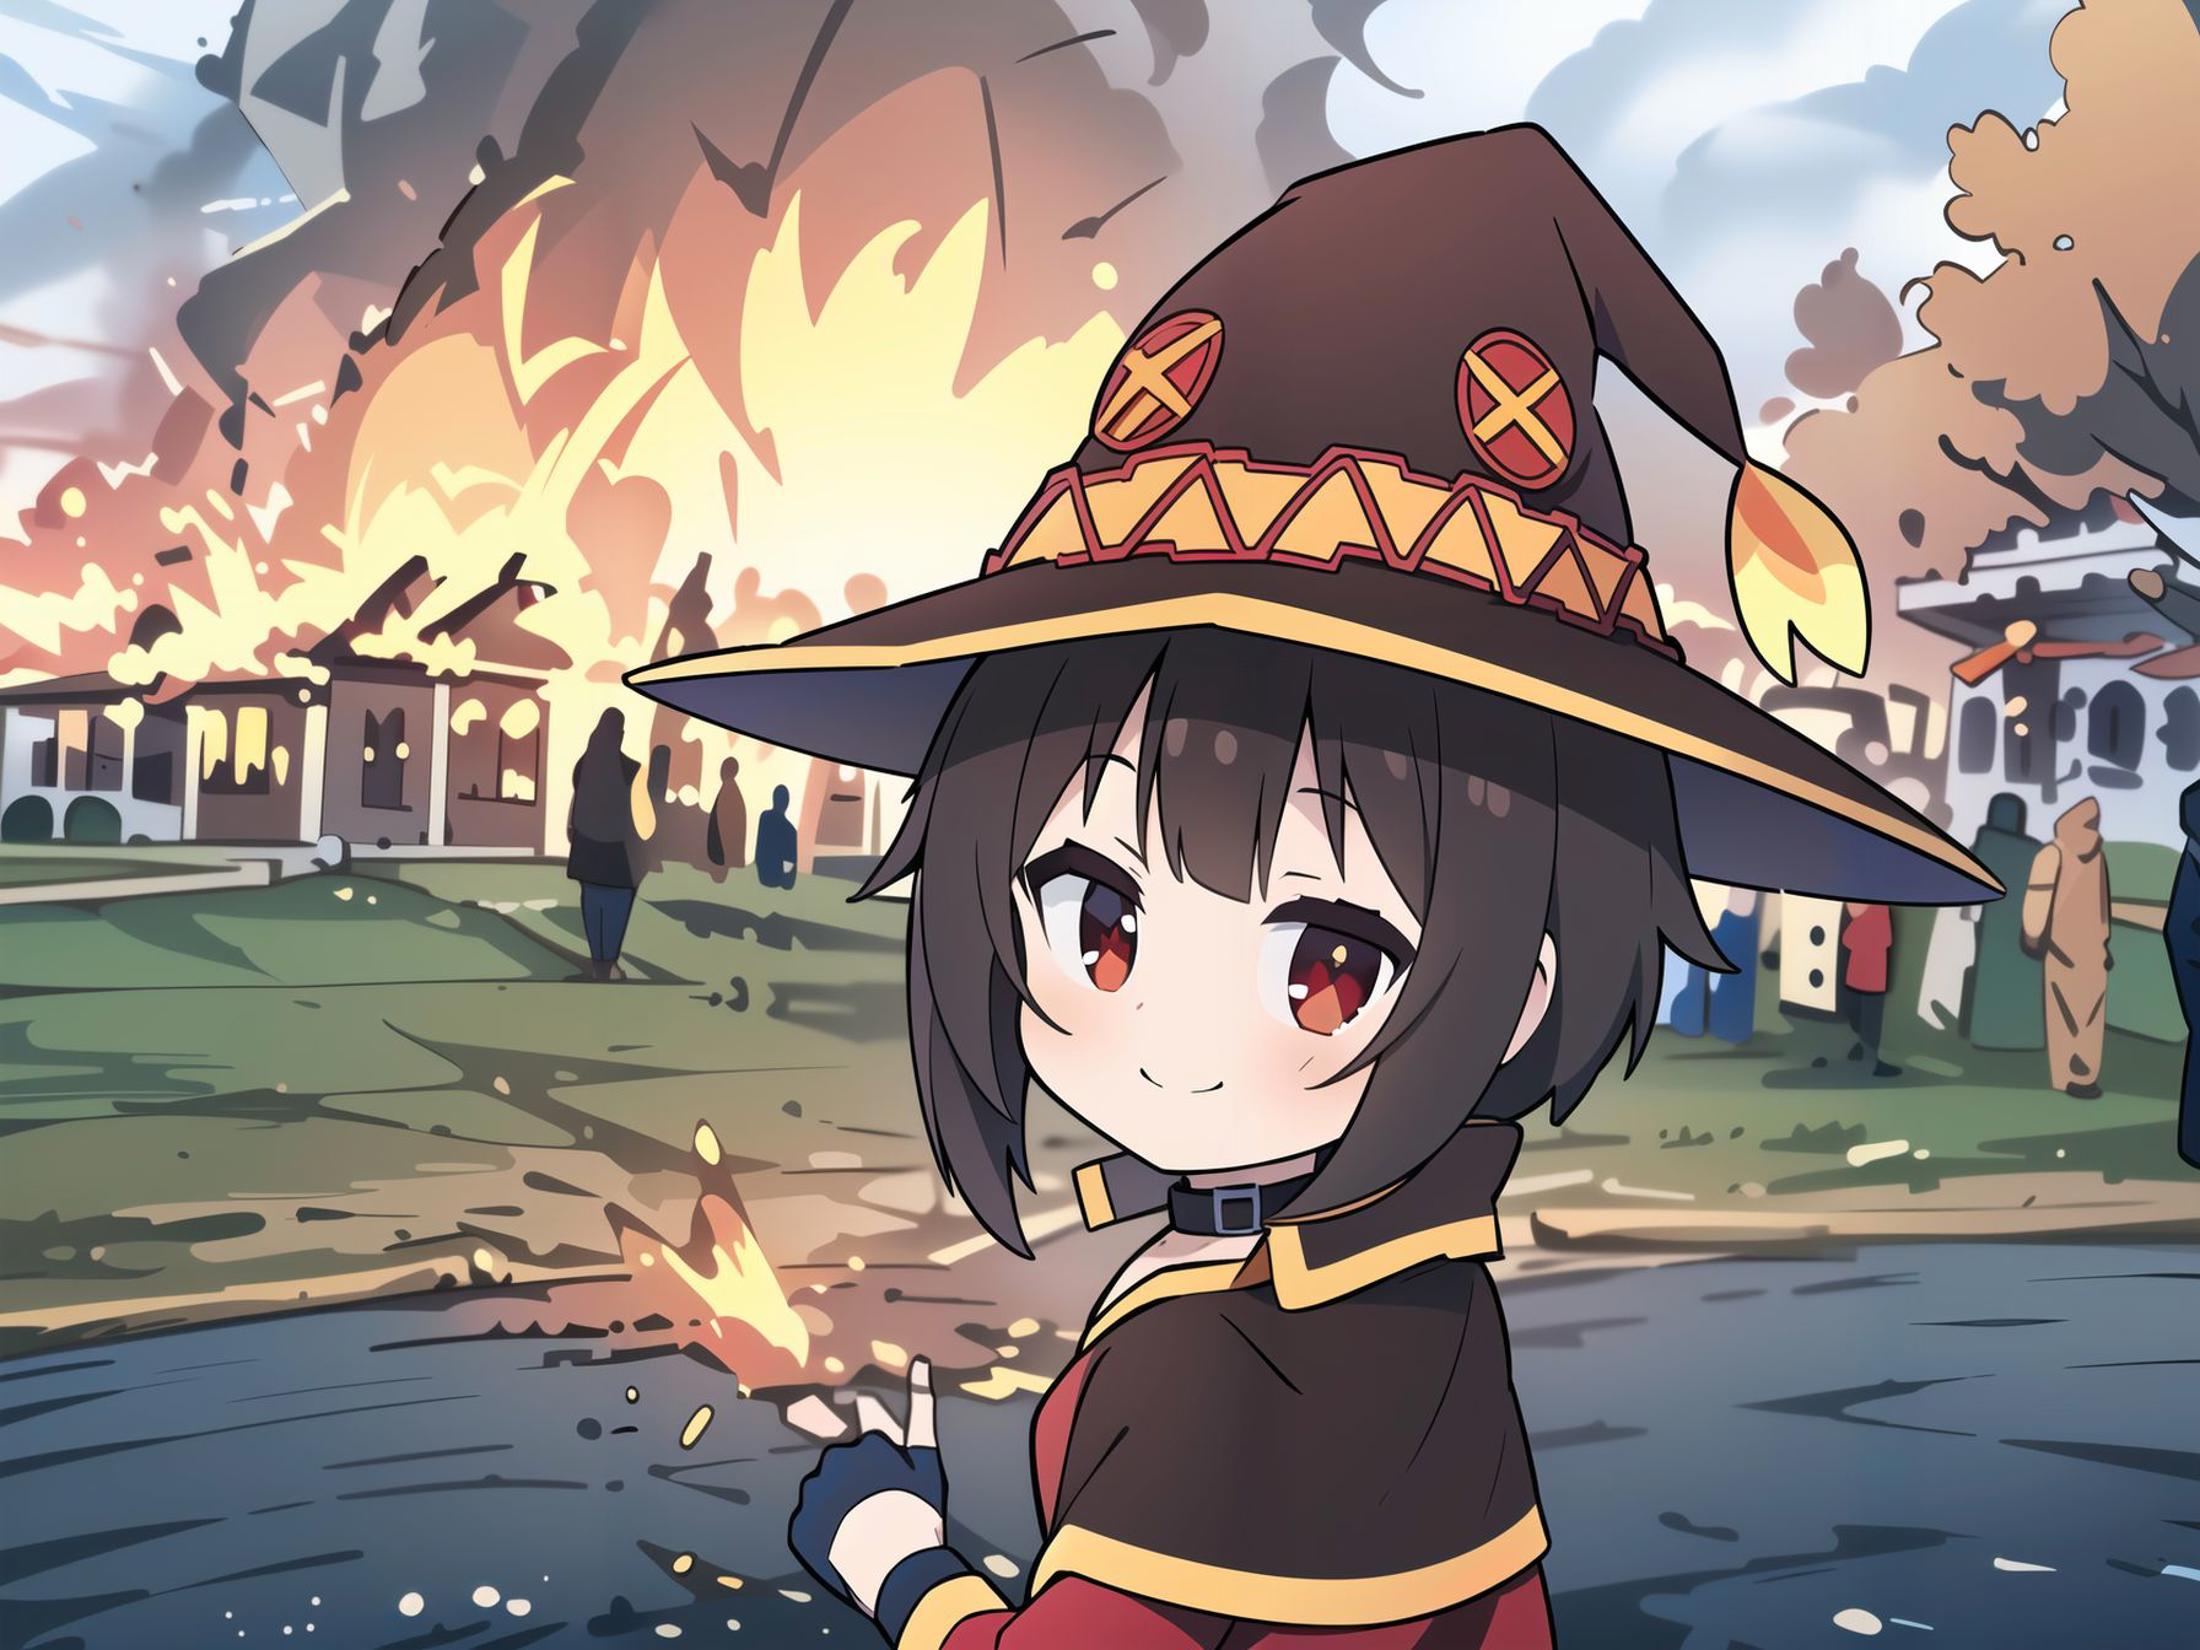 A young woman in a witch's hat, surrounded by a crowd and flames.